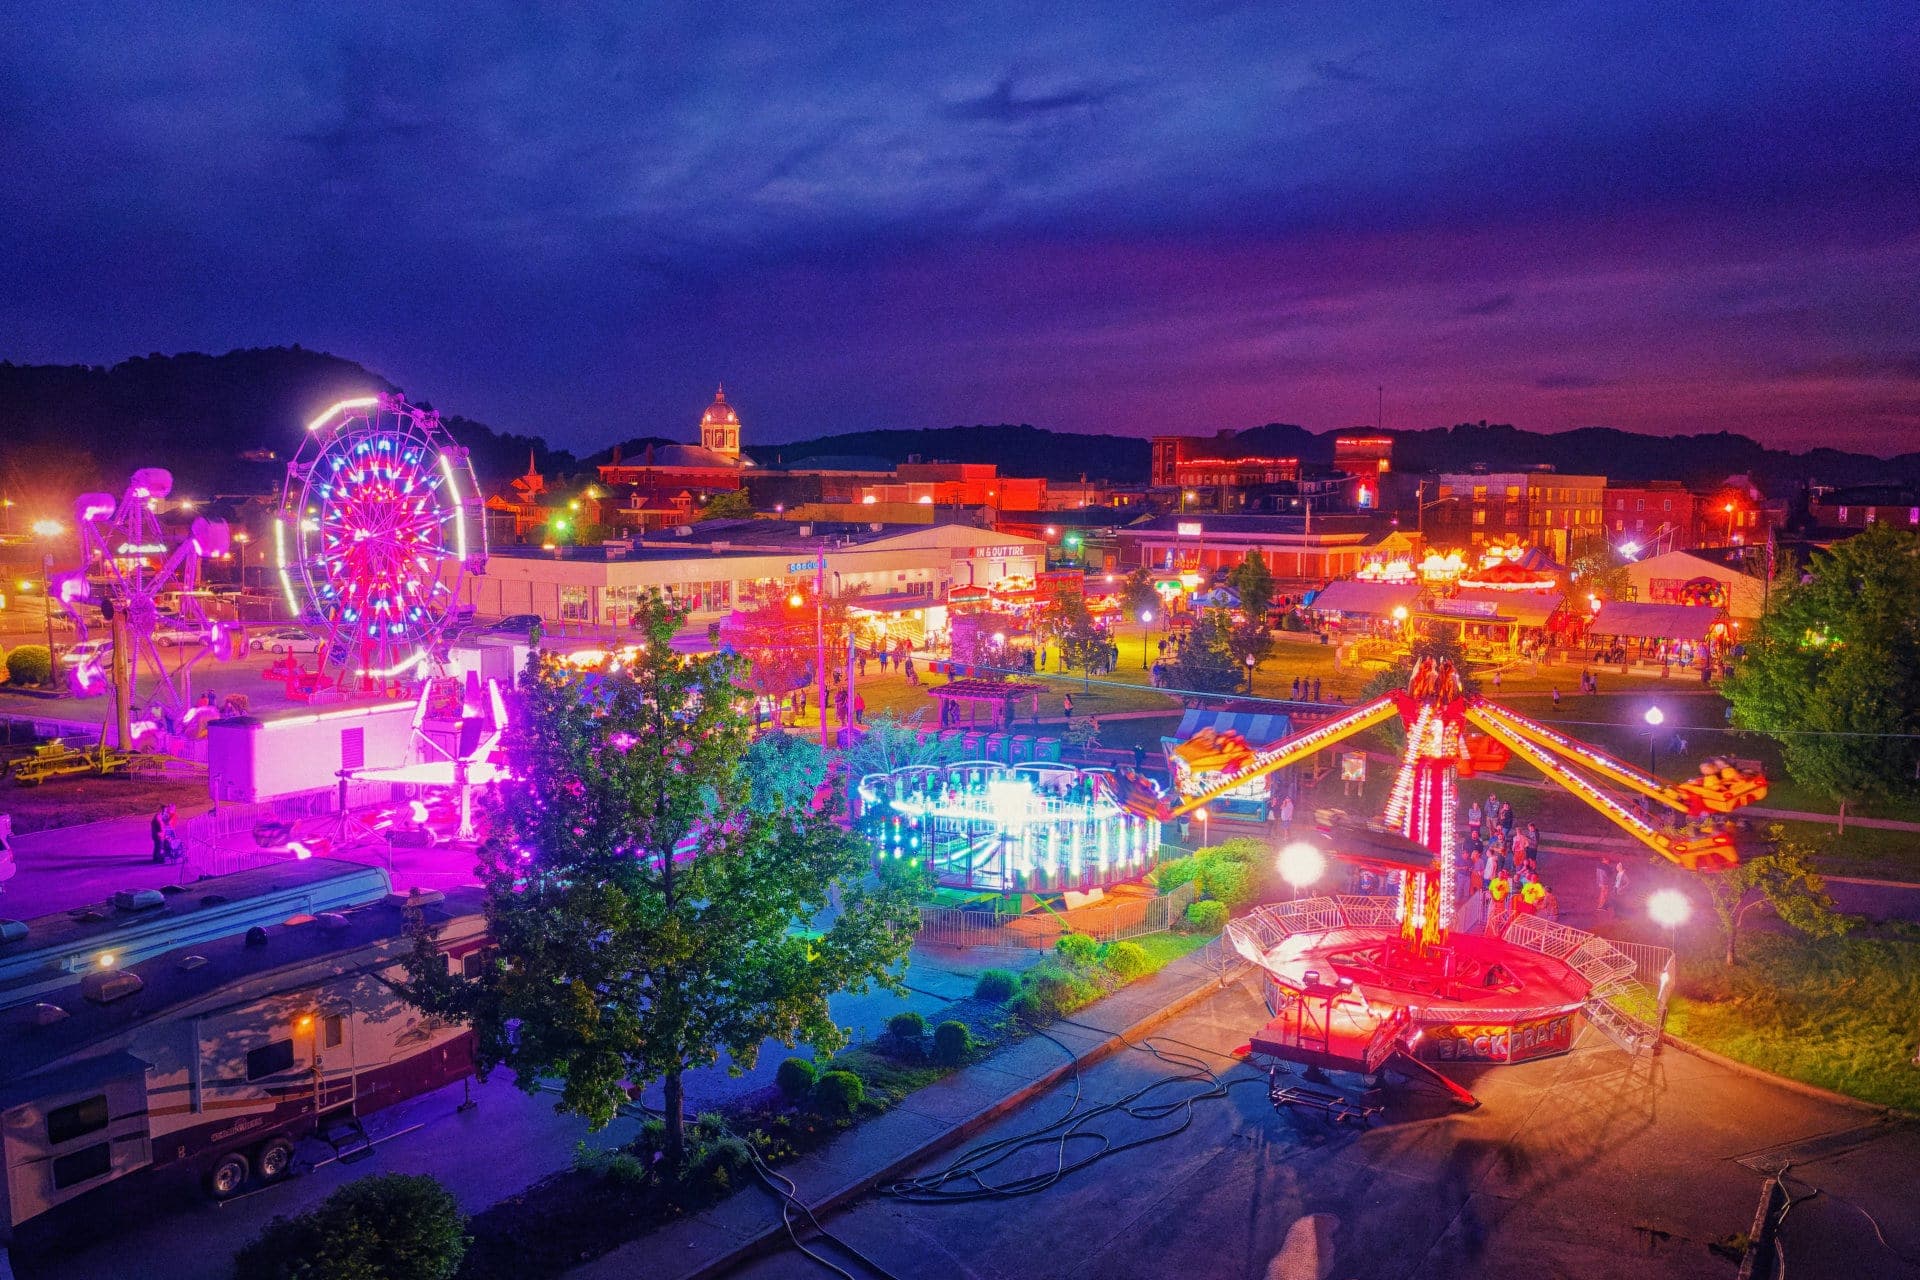 The carnival during the 2019 West Virginia Strawberry Festival. (Photo by Brian Bergstrom/My Buckhannon)